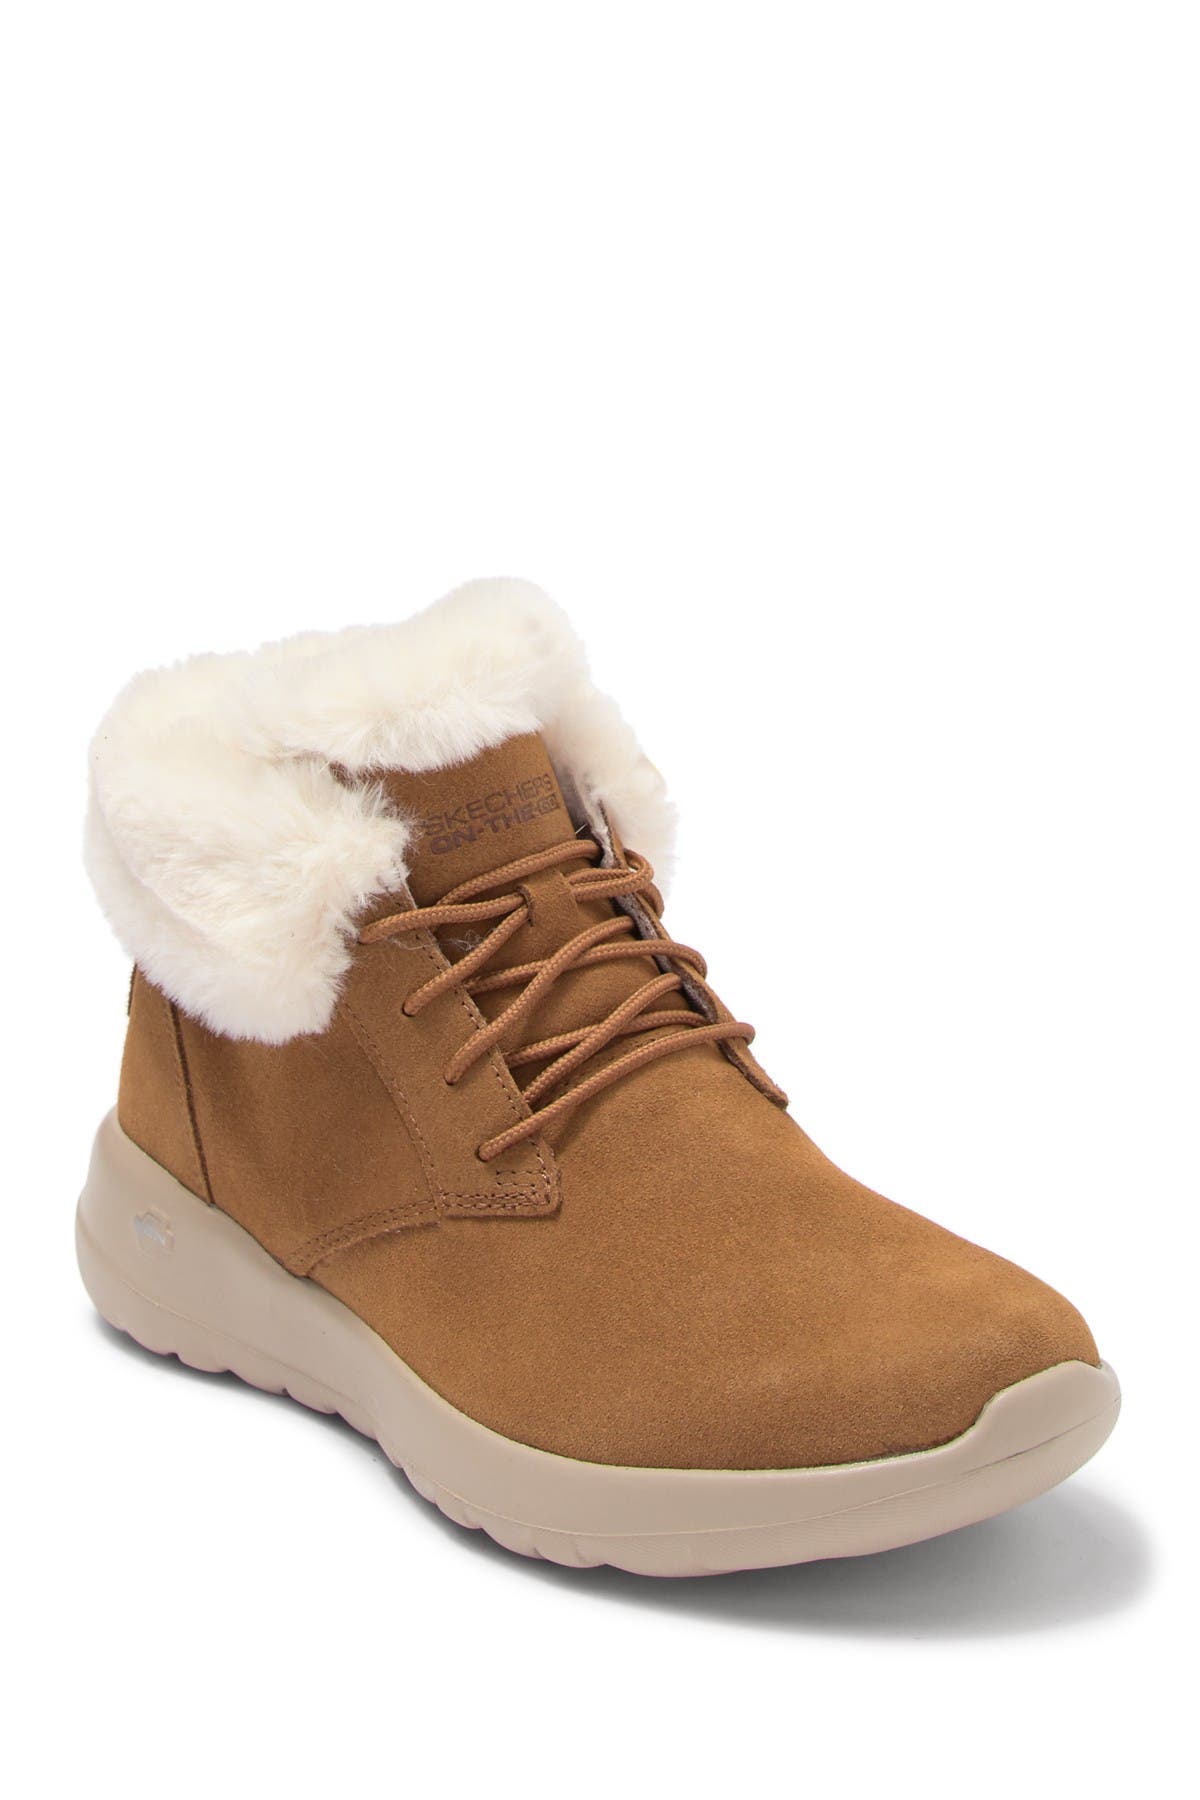 skechers on the go joy boots lace up